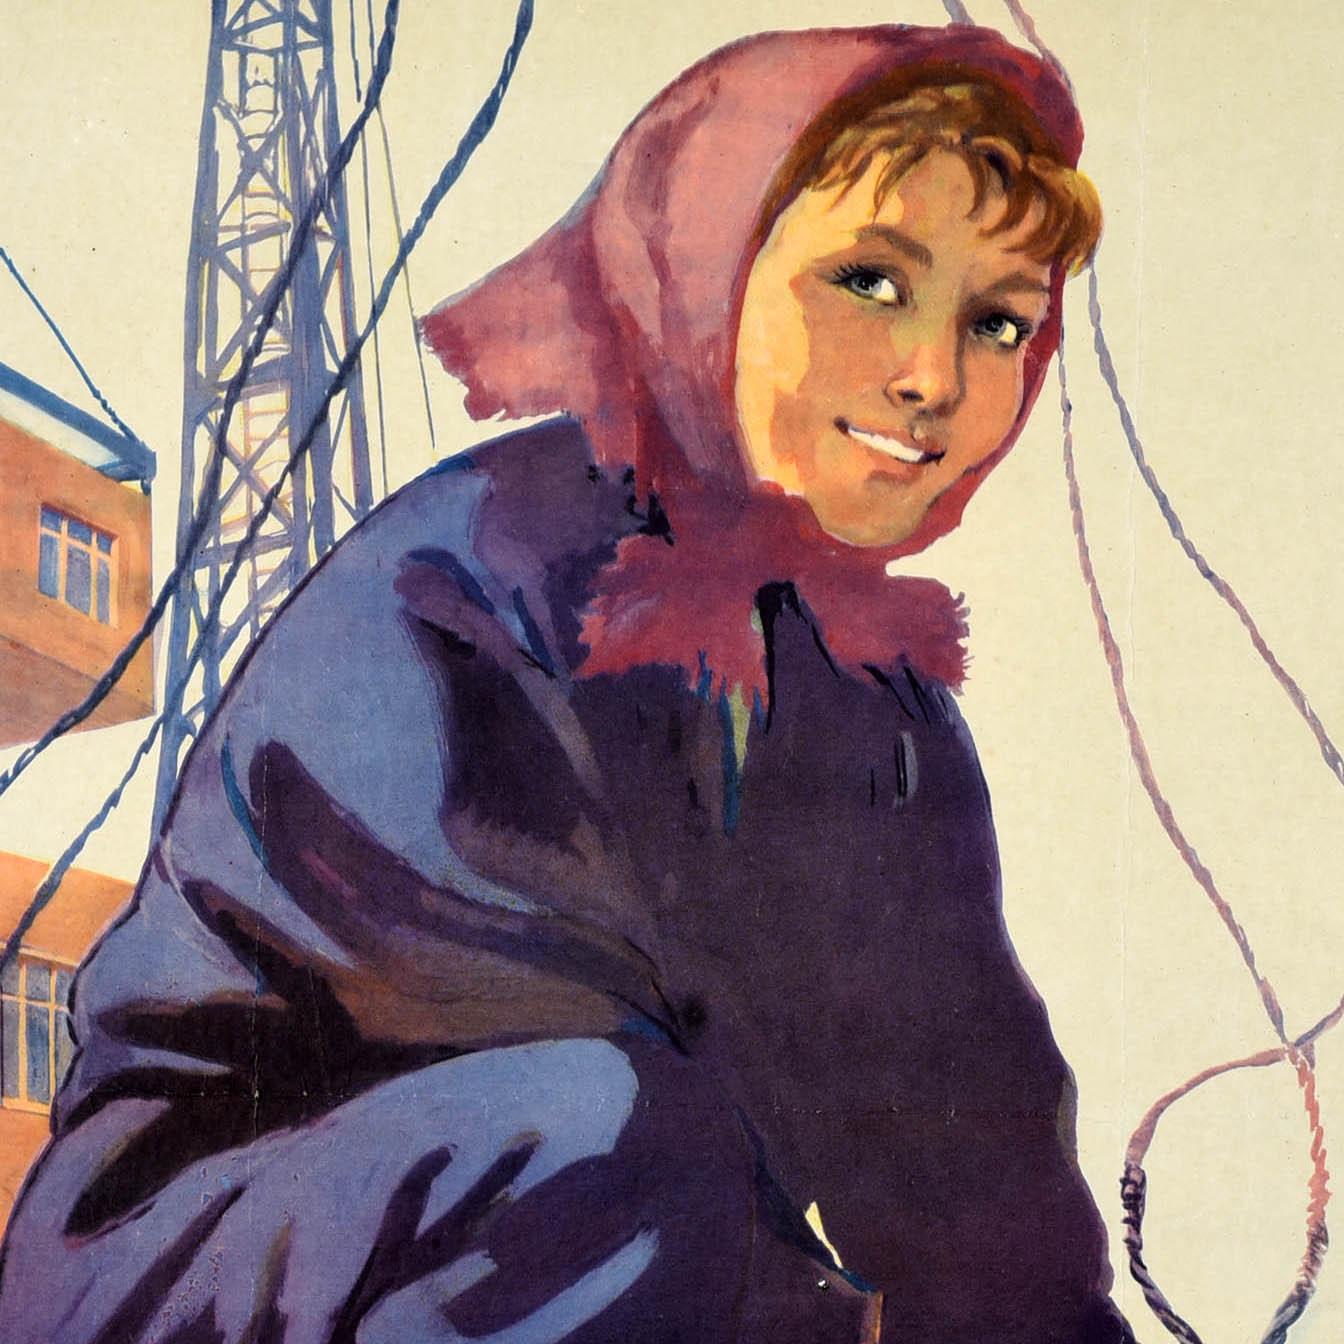 Original vintage Soviet propaganda poster - I love my profession I create happiness for people! / ????? ?????????, ? ????? ??????? ??????! Great design depicting a lady wearing a headscarf and overalls, boots and gloves working on a high rise